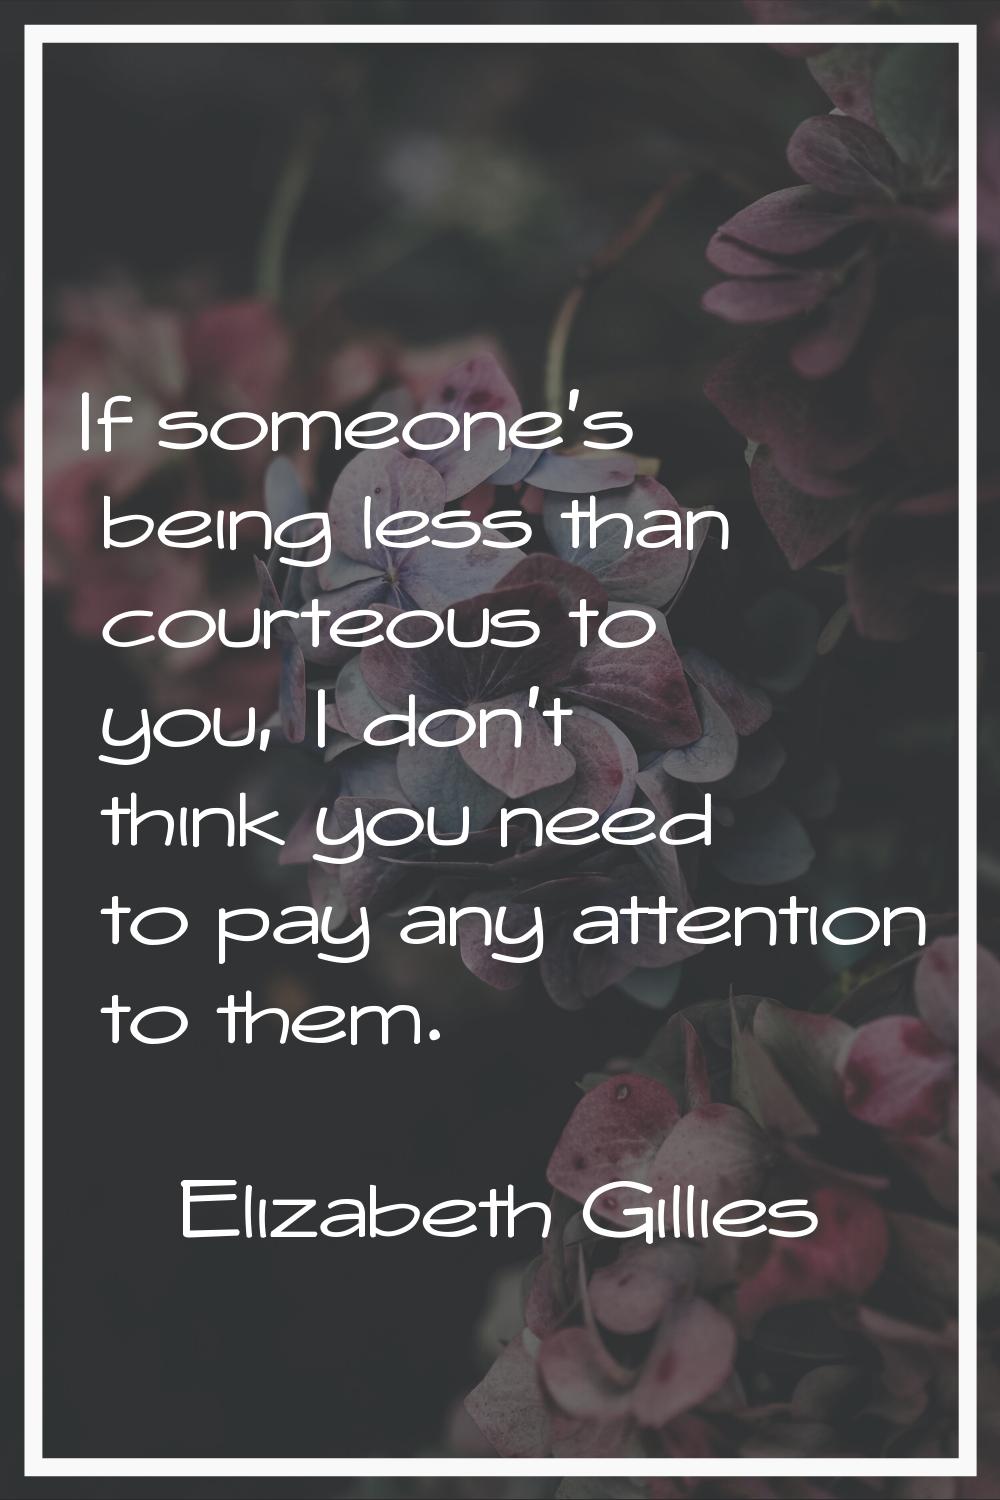 If someone's being less than courteous to you, I don't think you need to pay any attention to them.